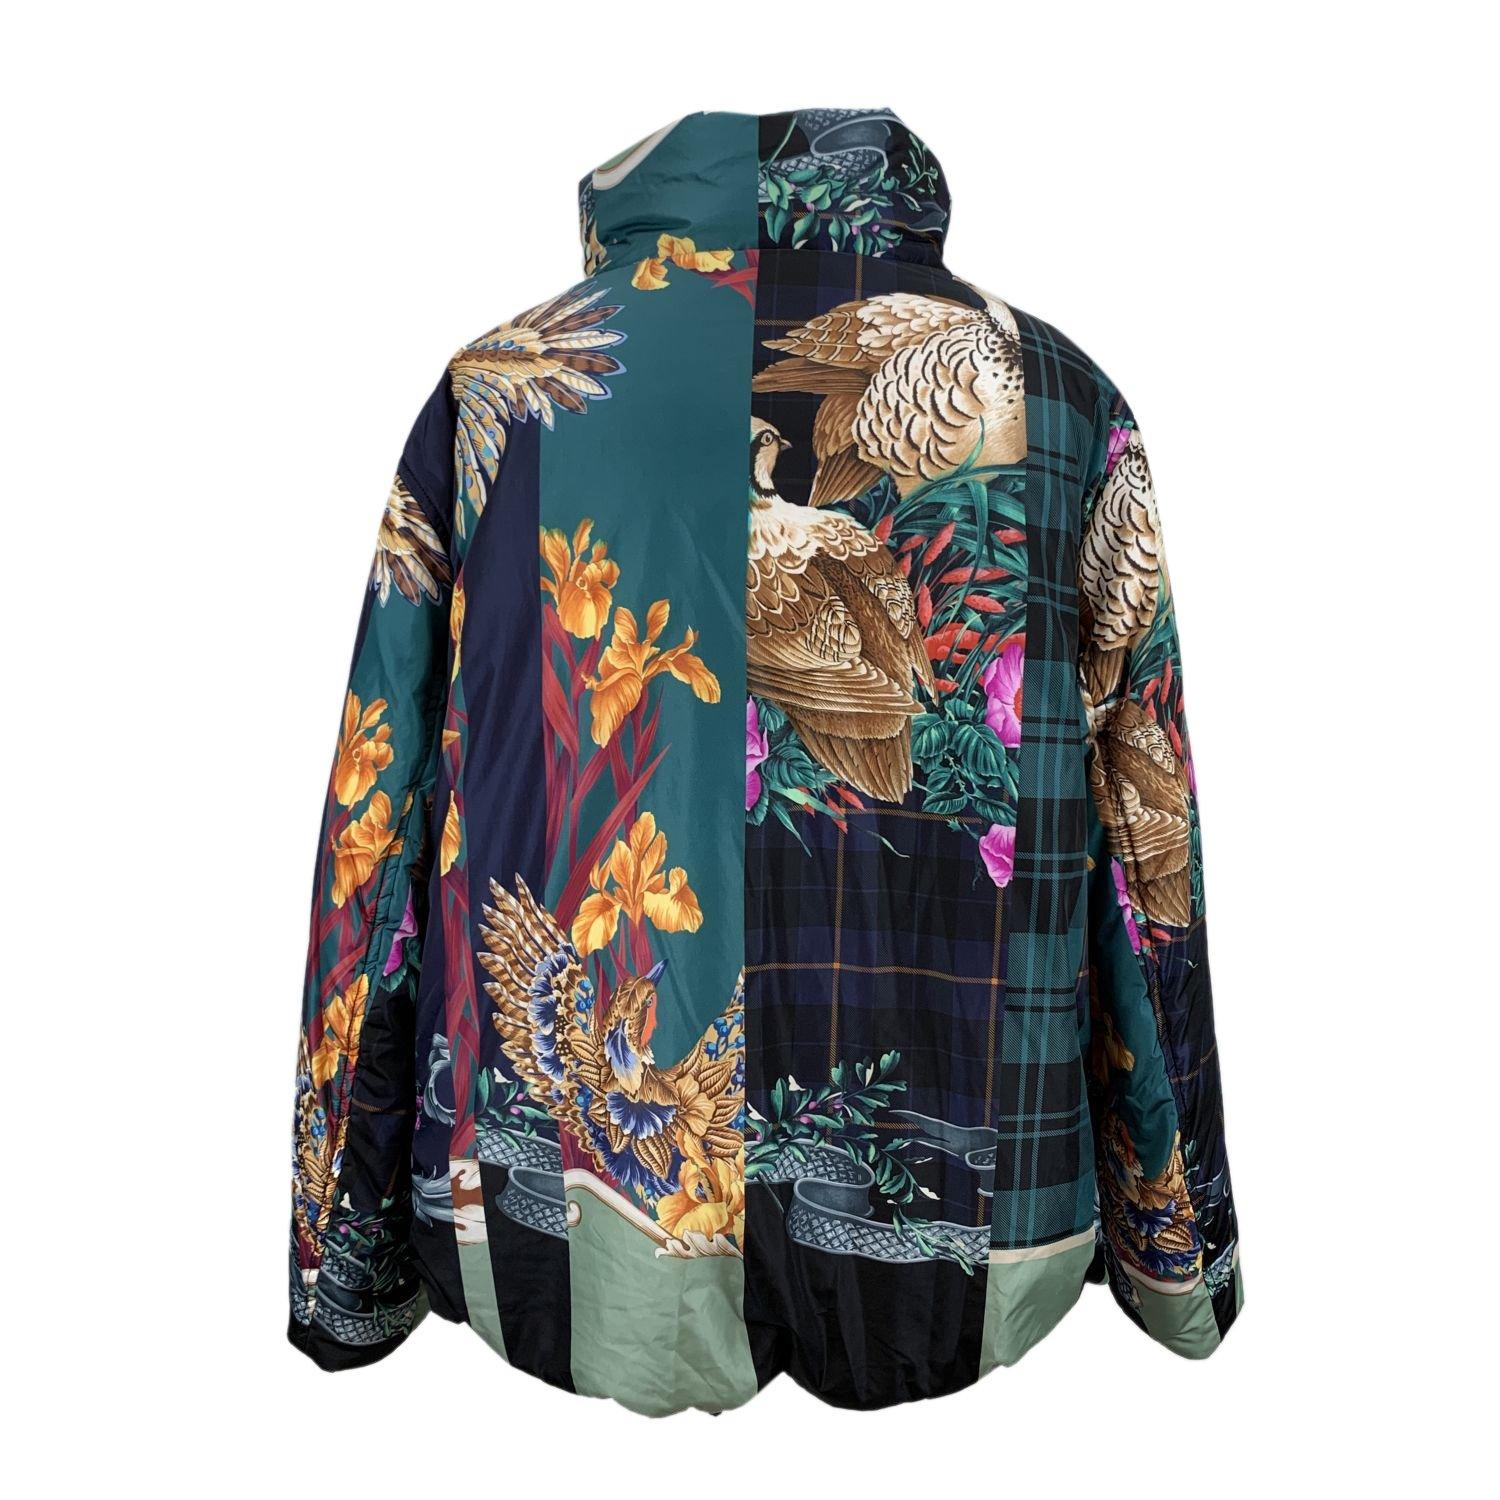 Salvatore Ferragamo multi print puffer jacket. It features a stand up collar, button closure on the front, long sleeve styling and a drawstring hem. 2 pockets on the waist. Composition: 100% Polyamide. Filling: 100% Polyester. Size: 40 IT (The size